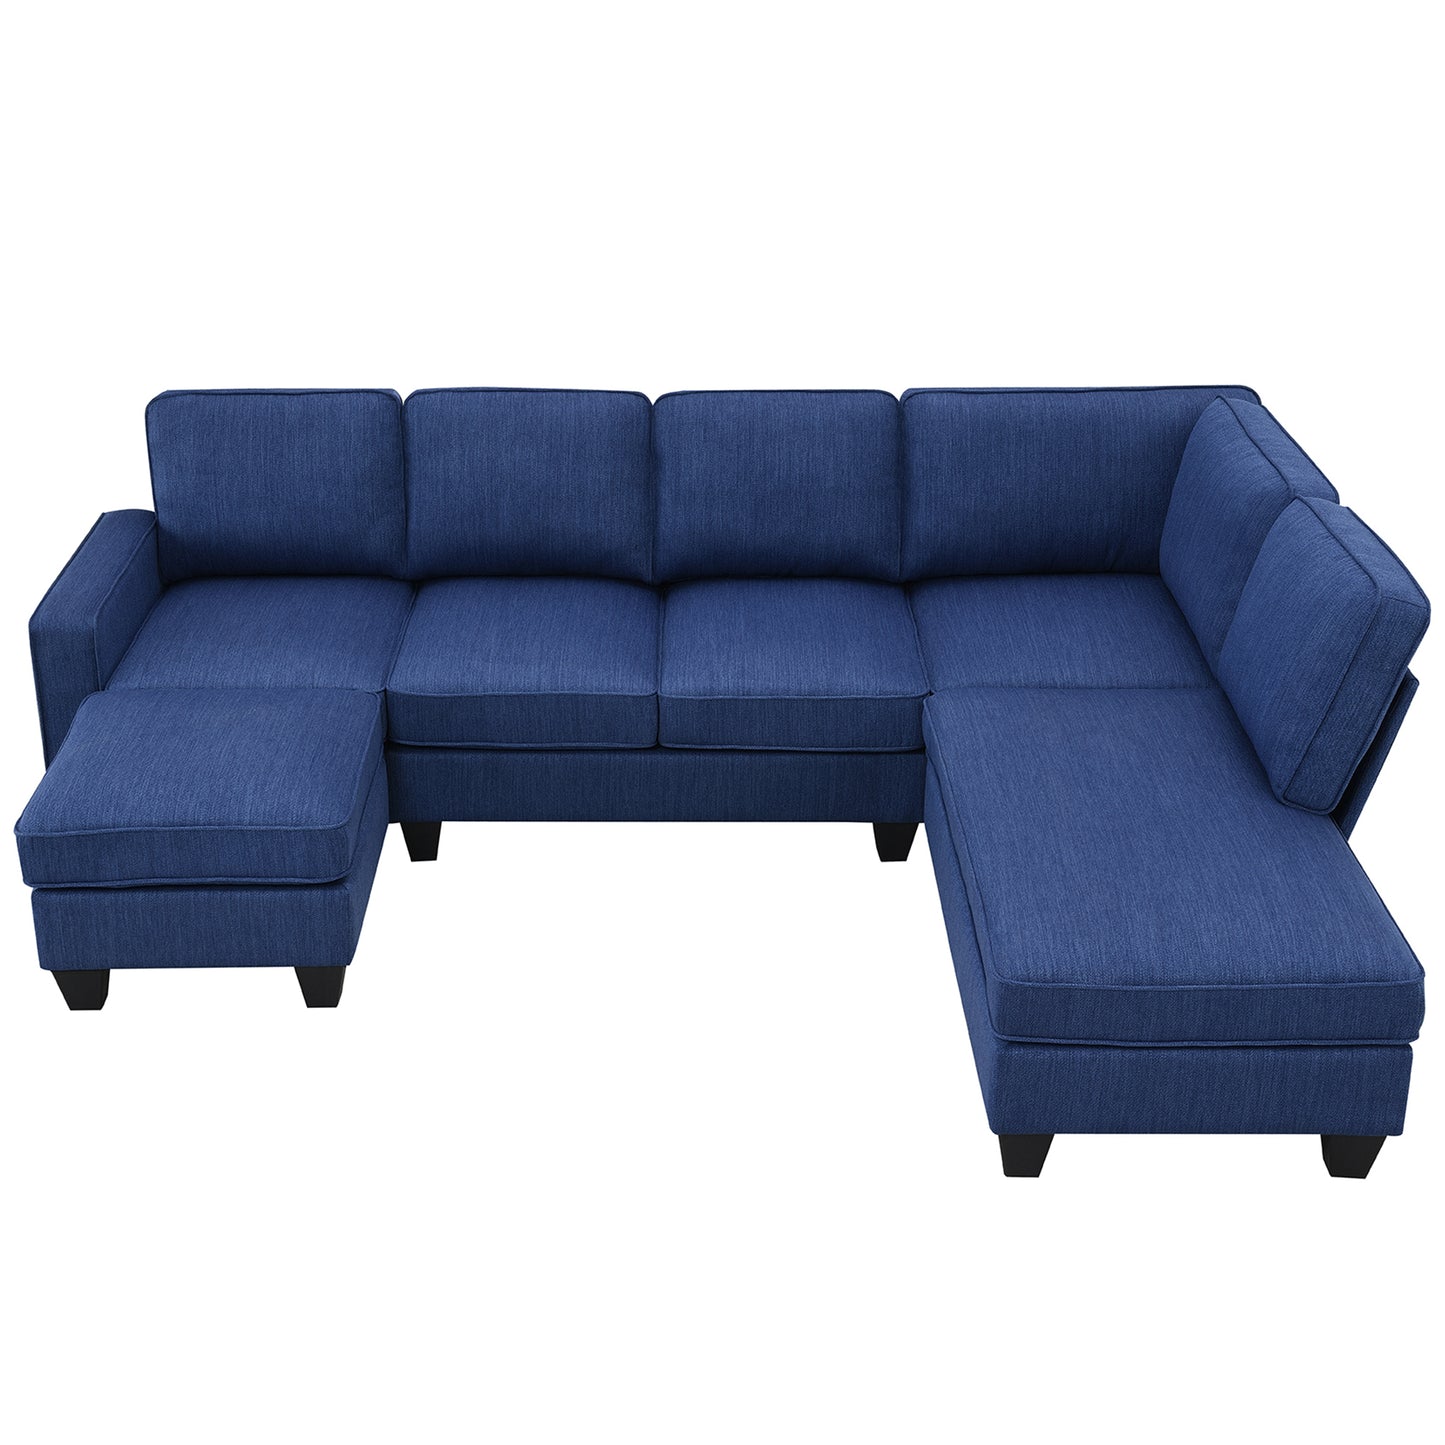 Modern L-Shaped Sectional Sofa with Convertible Ottoman and Chaise Lounge